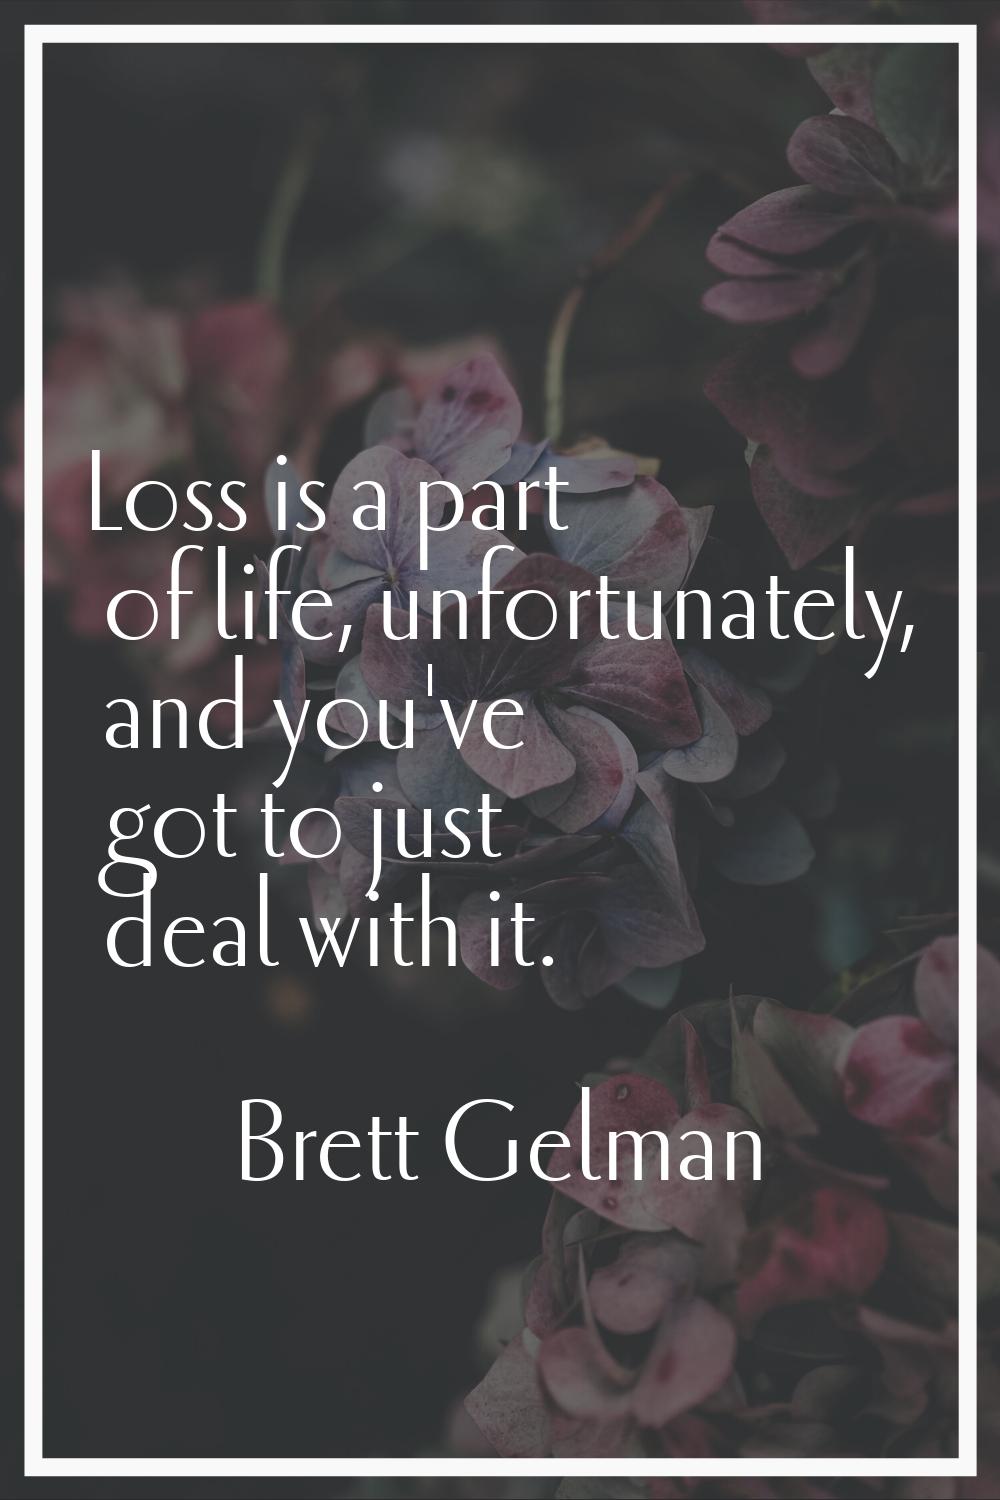 Loss is a part of life, unfortunately, and you've got to just deal with it.